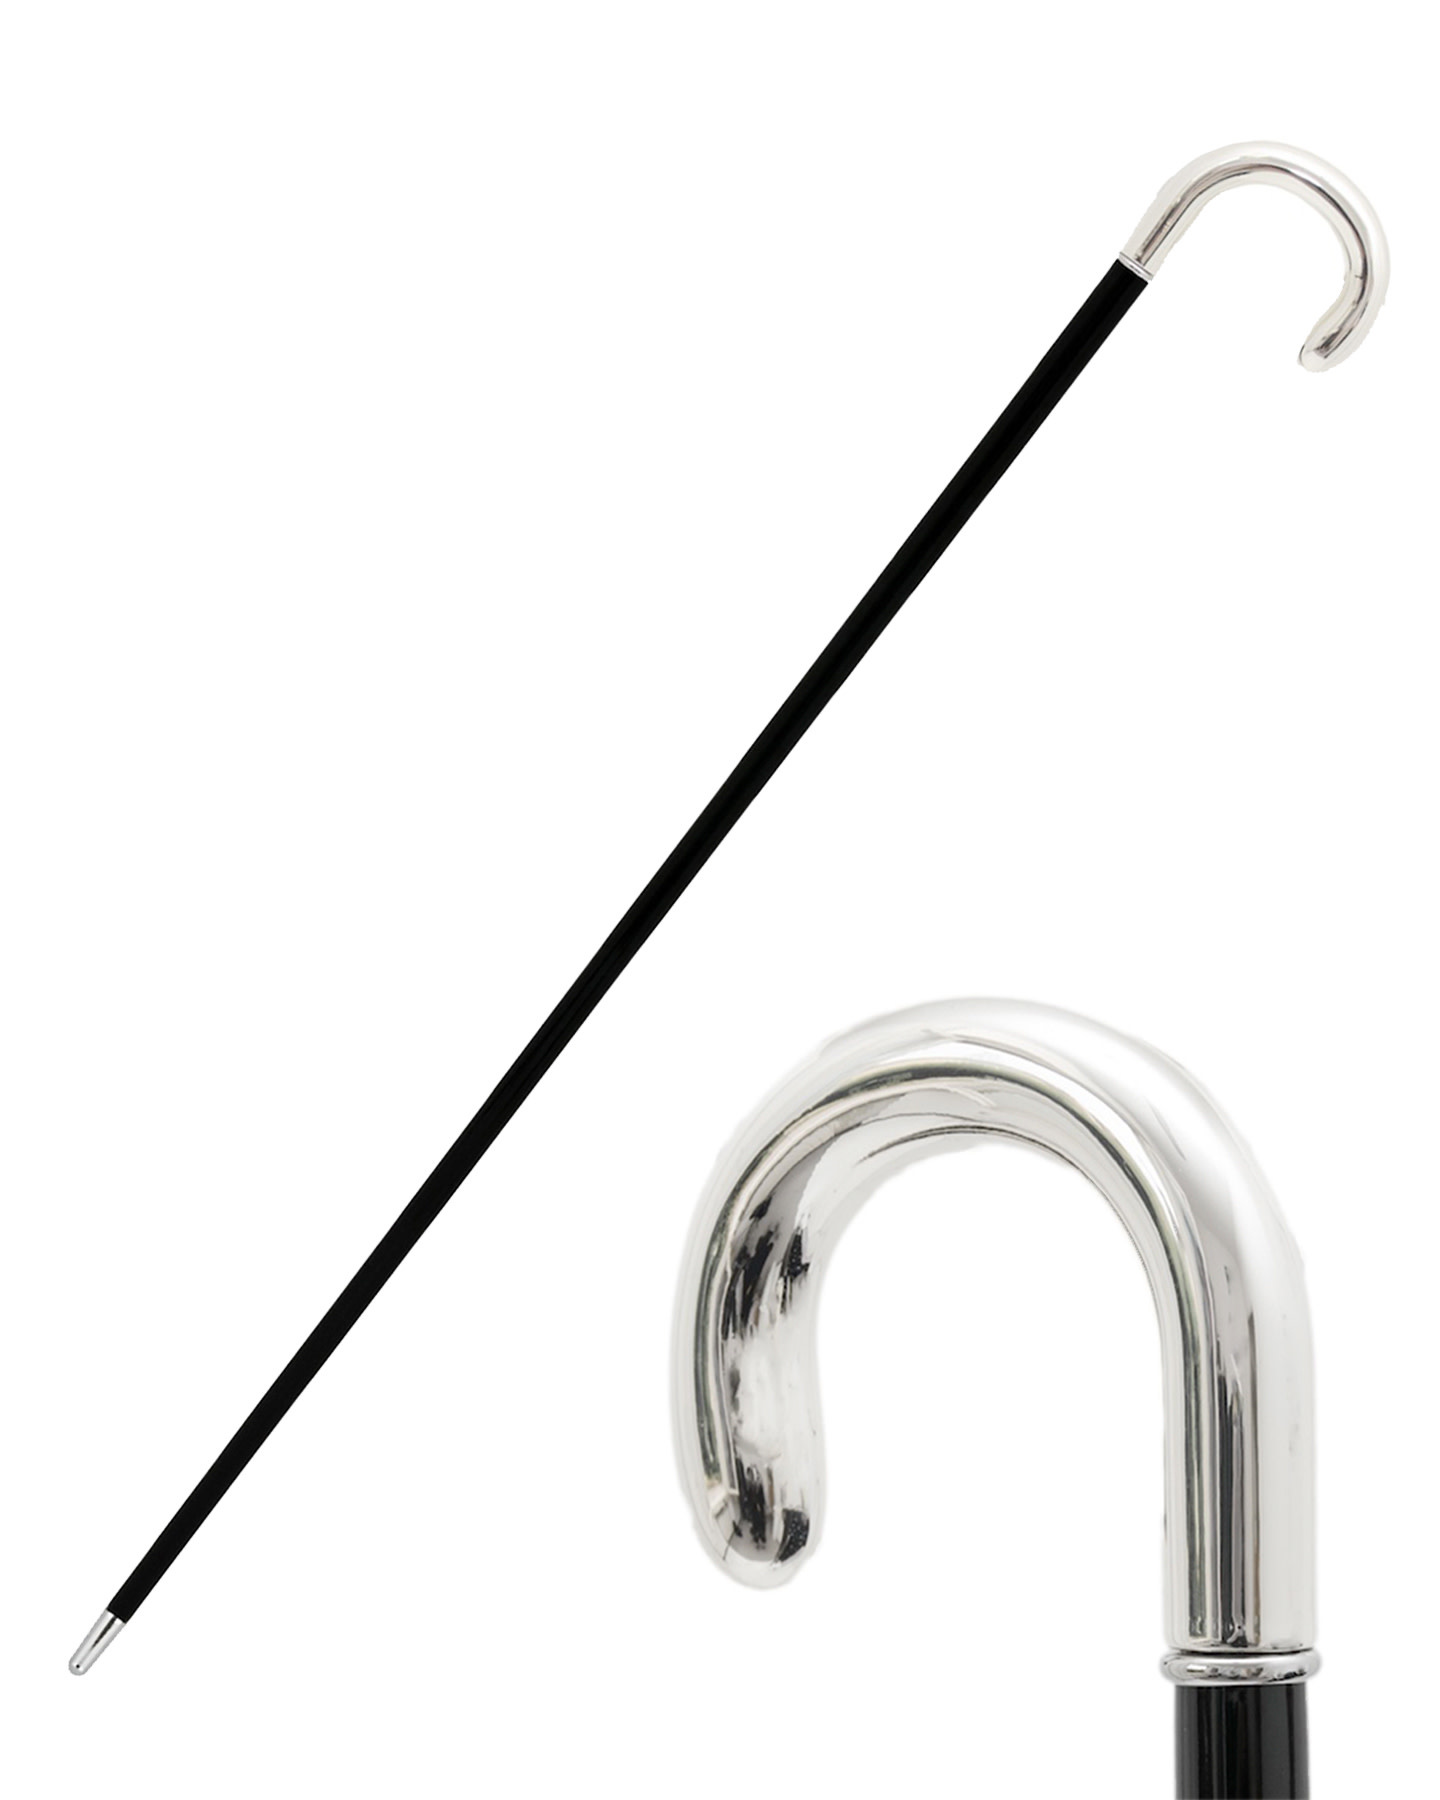 CURVED SILVER HANDLE CANE